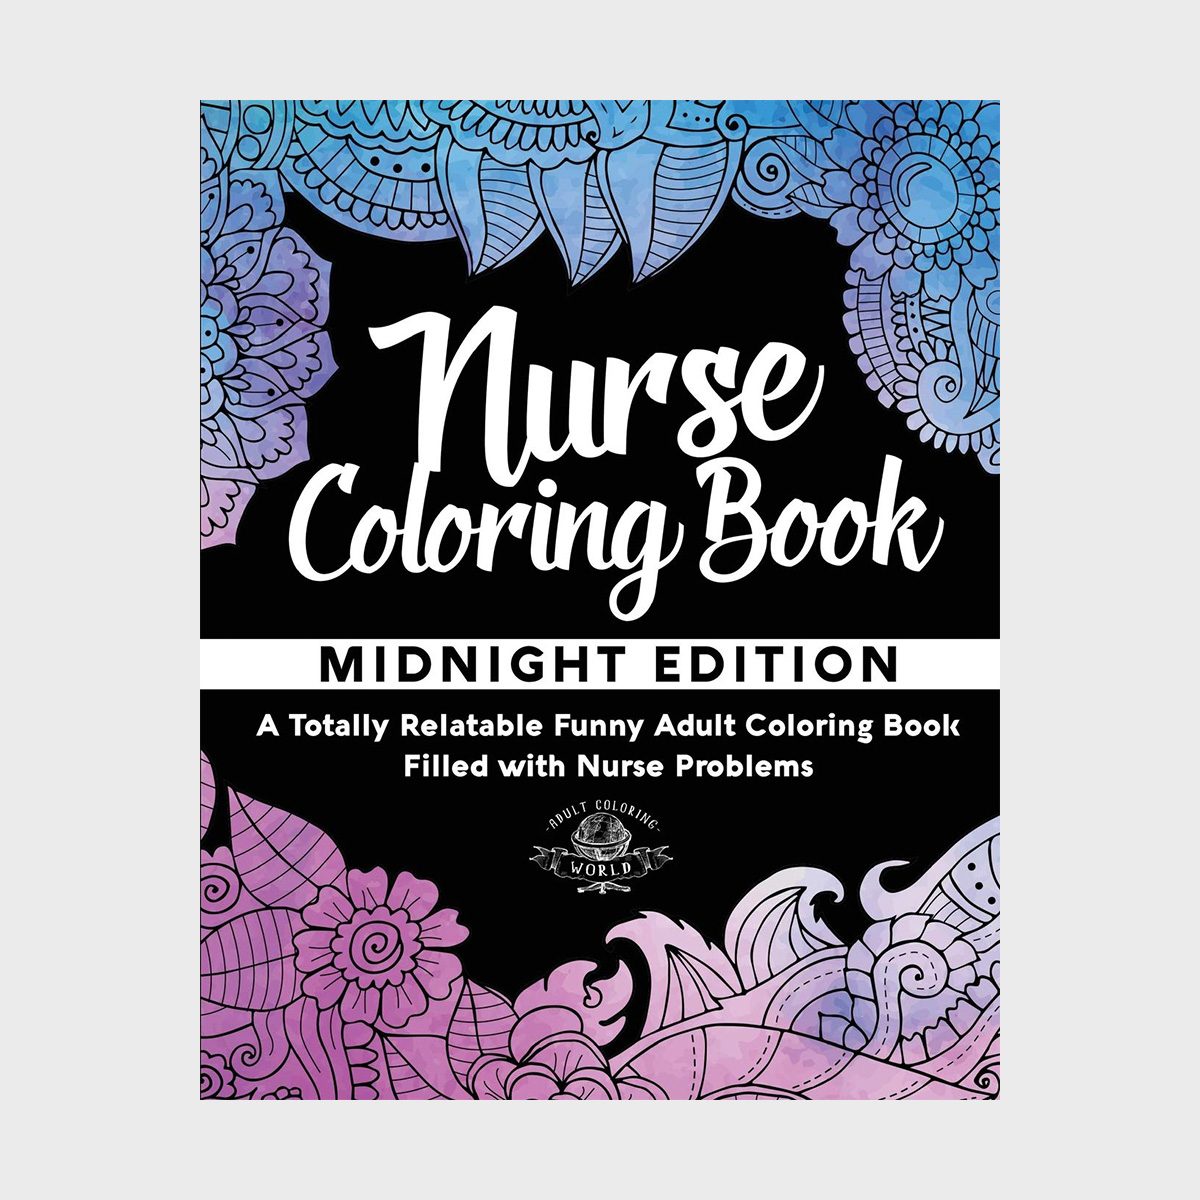 90 Best Gifts For Nurses